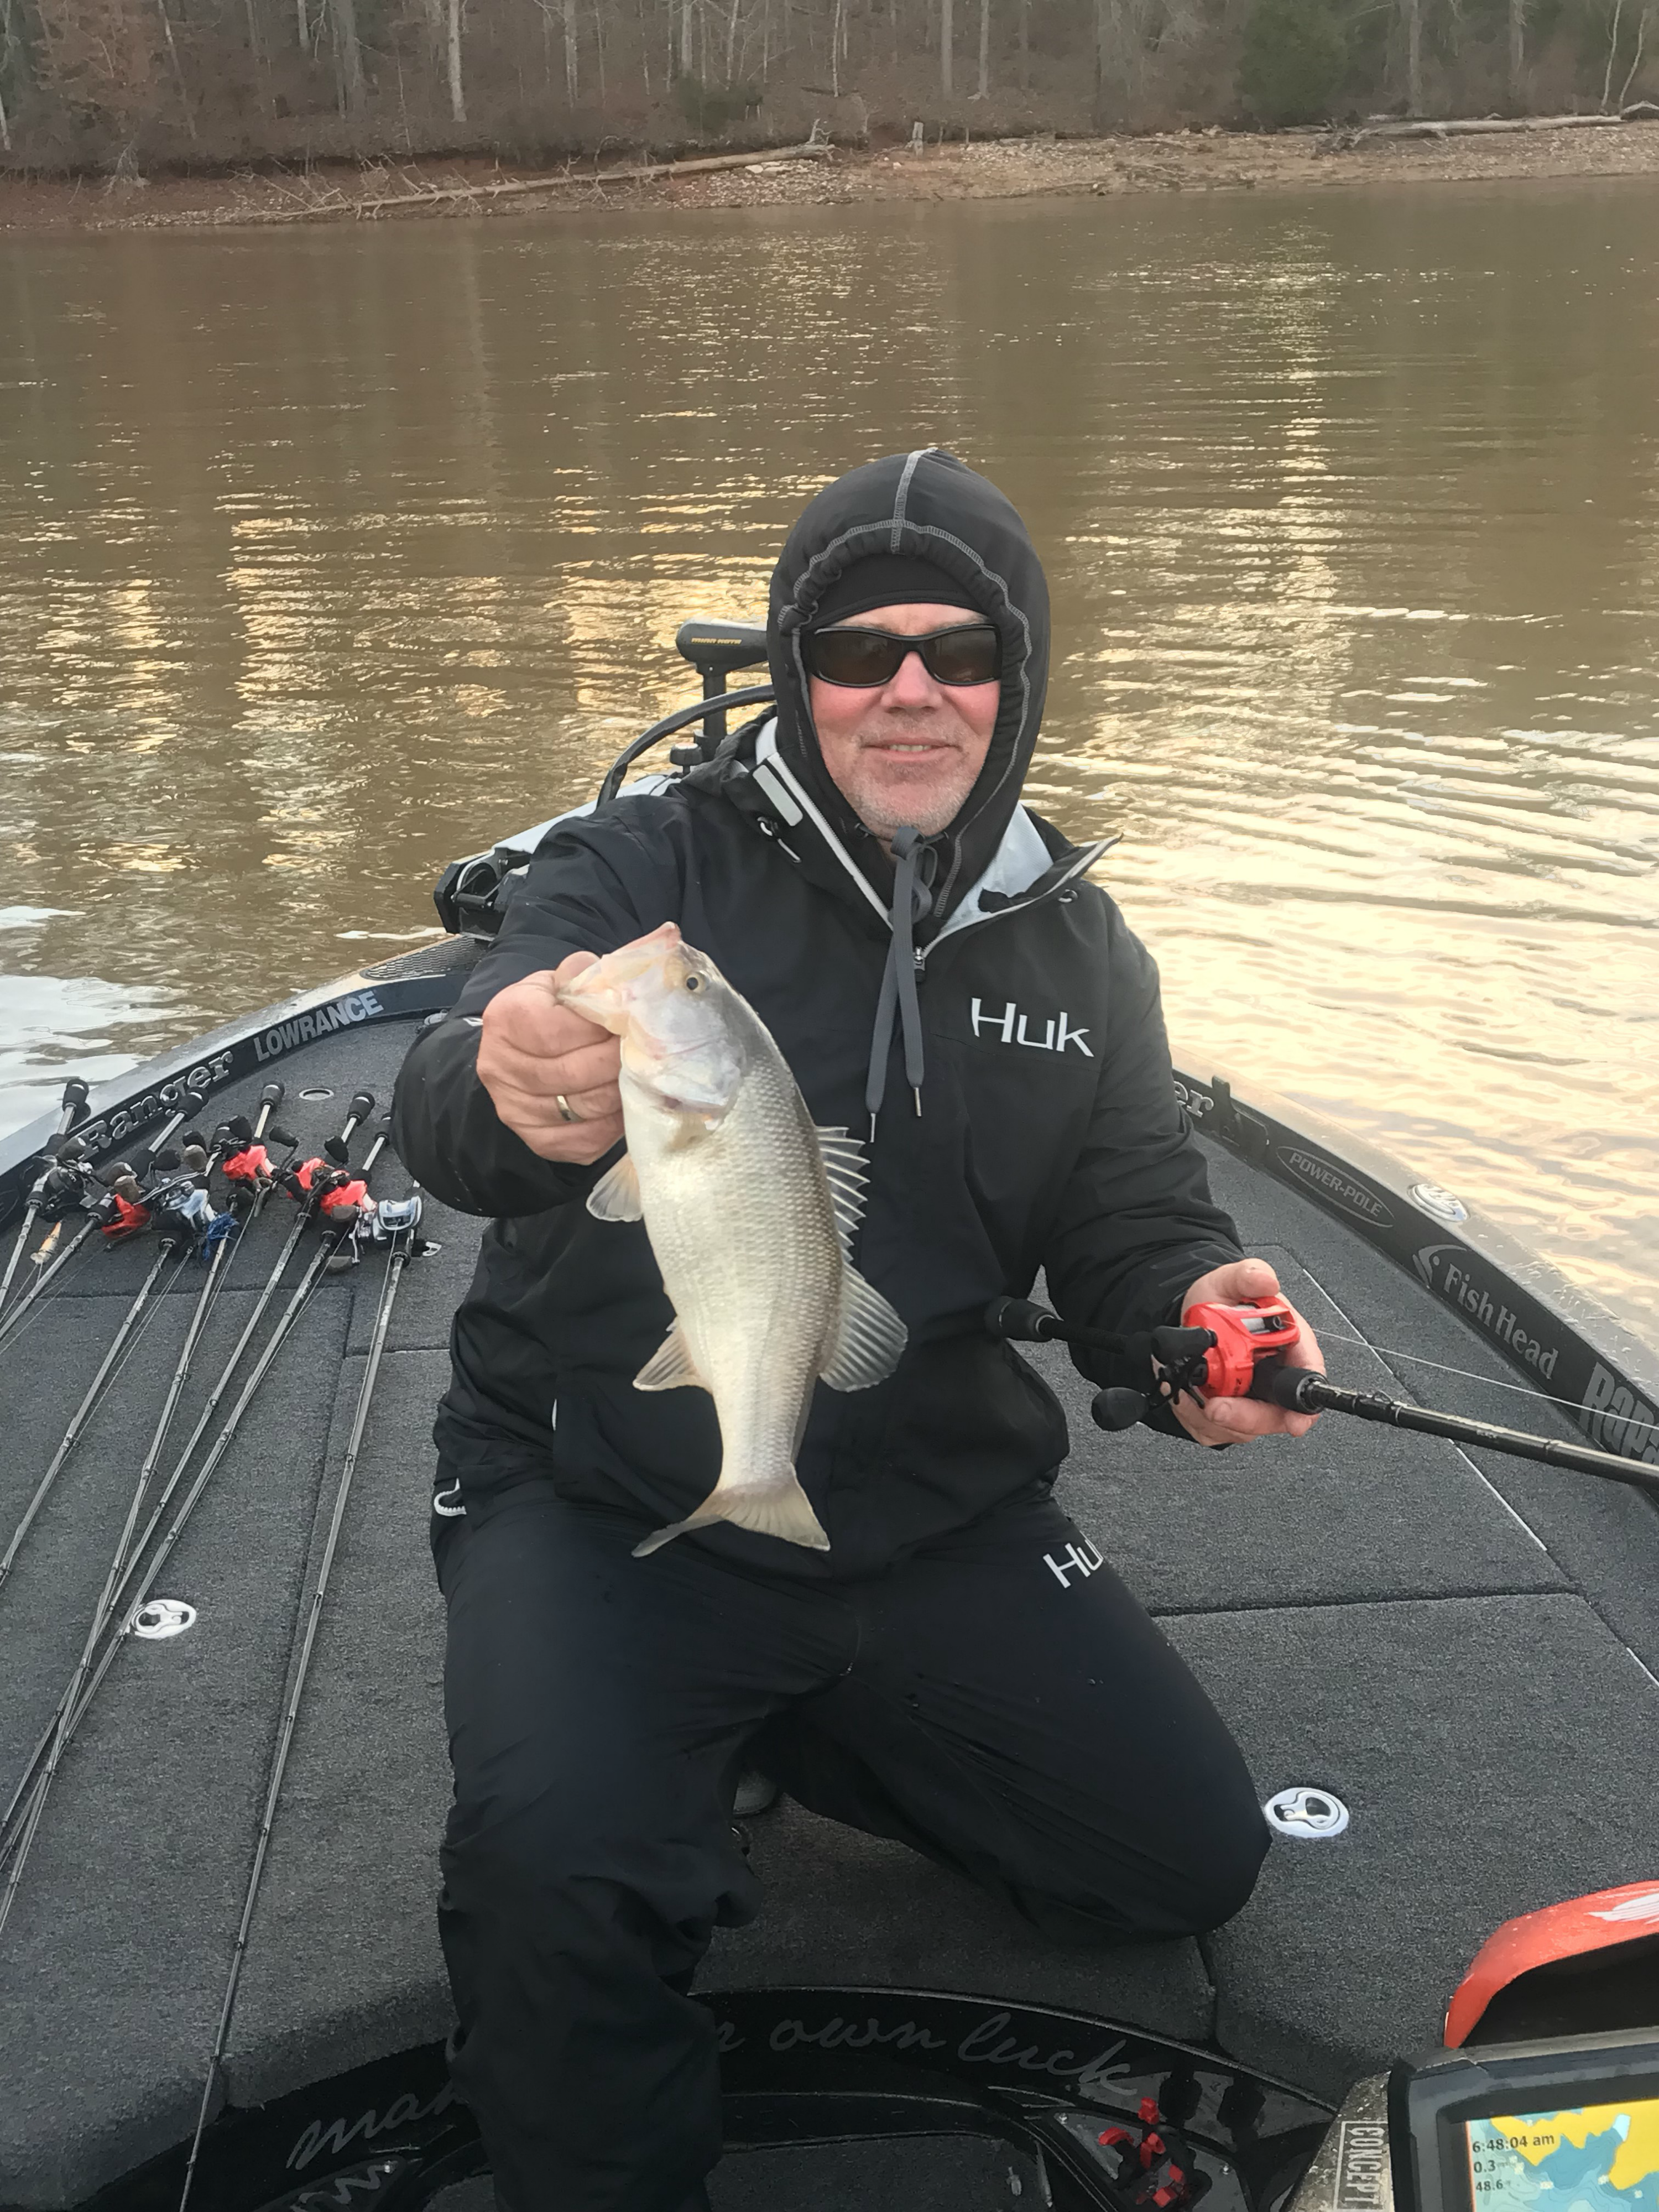 Dave Lefebre is fired up early this morning! Two keepers in the boat before 6:40!